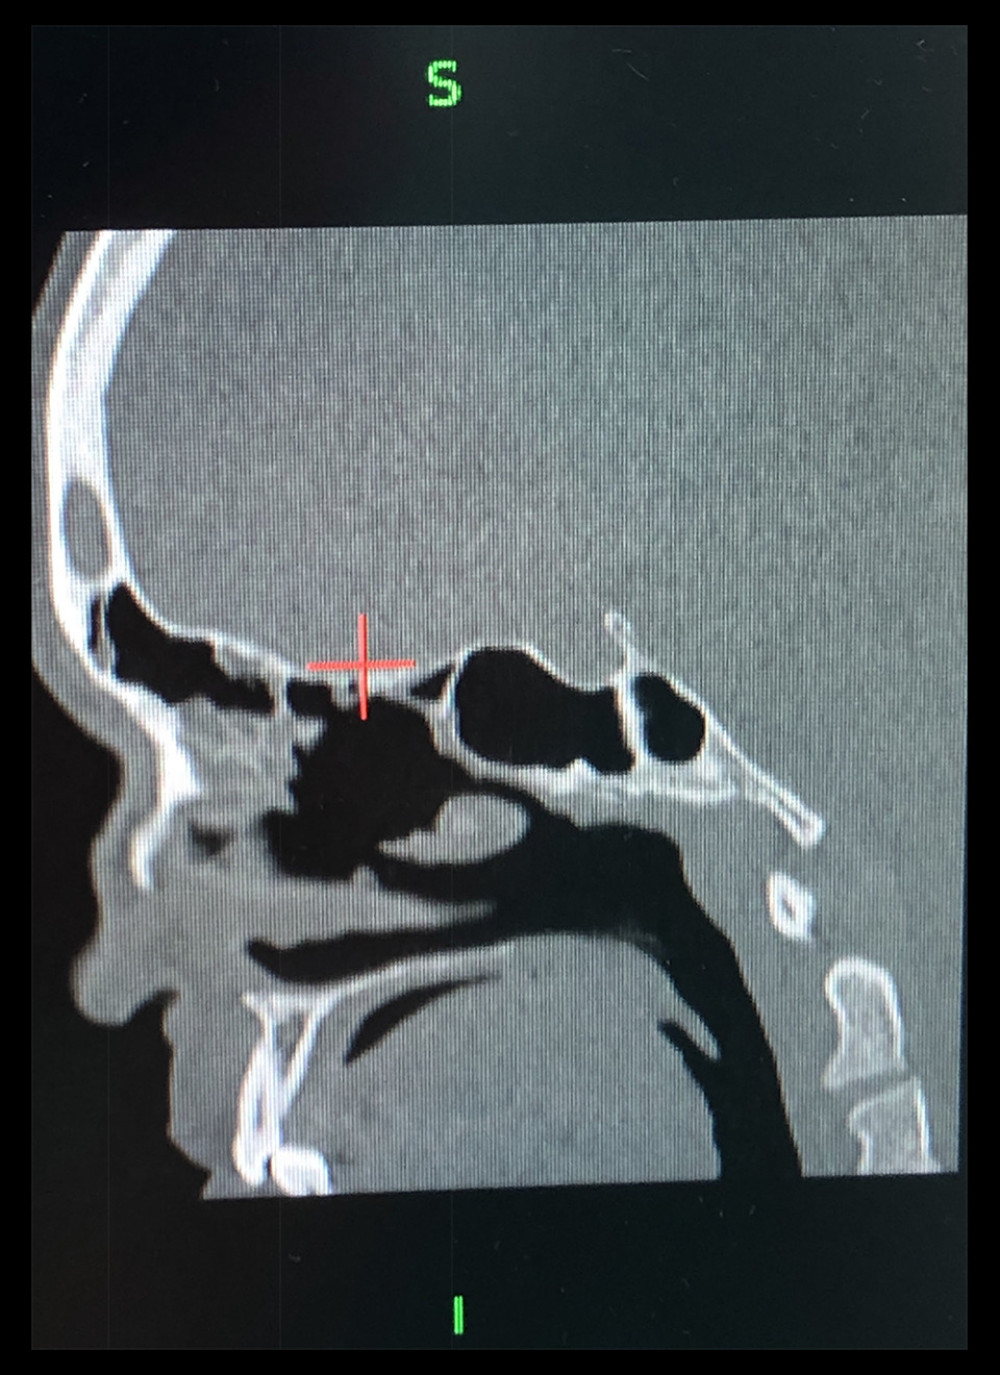 CT scan sagittal view: nasal septum perforation, nasal collapse, and deformation.